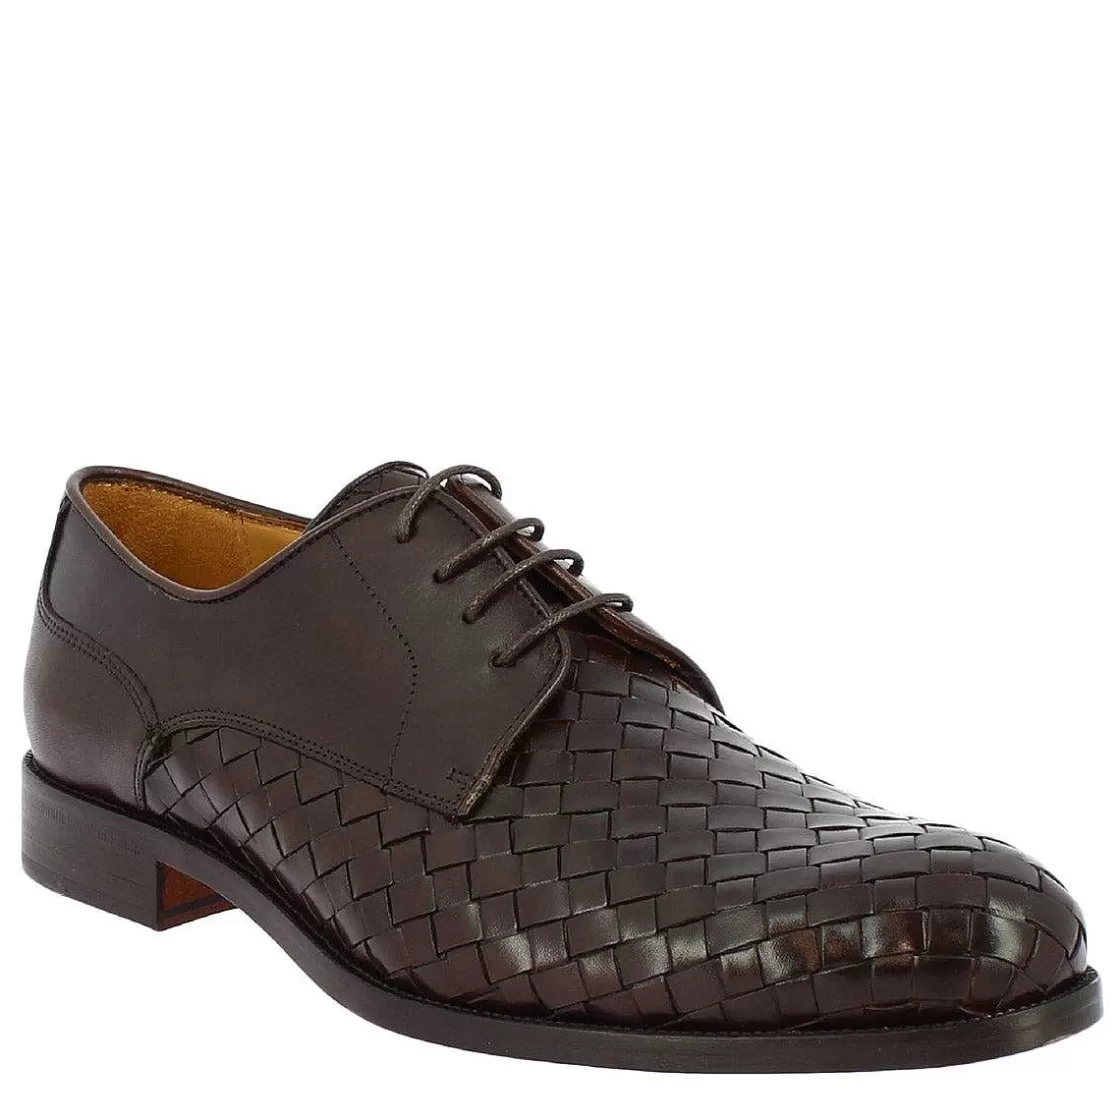 Leonardo Men'S Lace-Up Shoes Handmade In Chocolate Woven Calf Leather Cheap